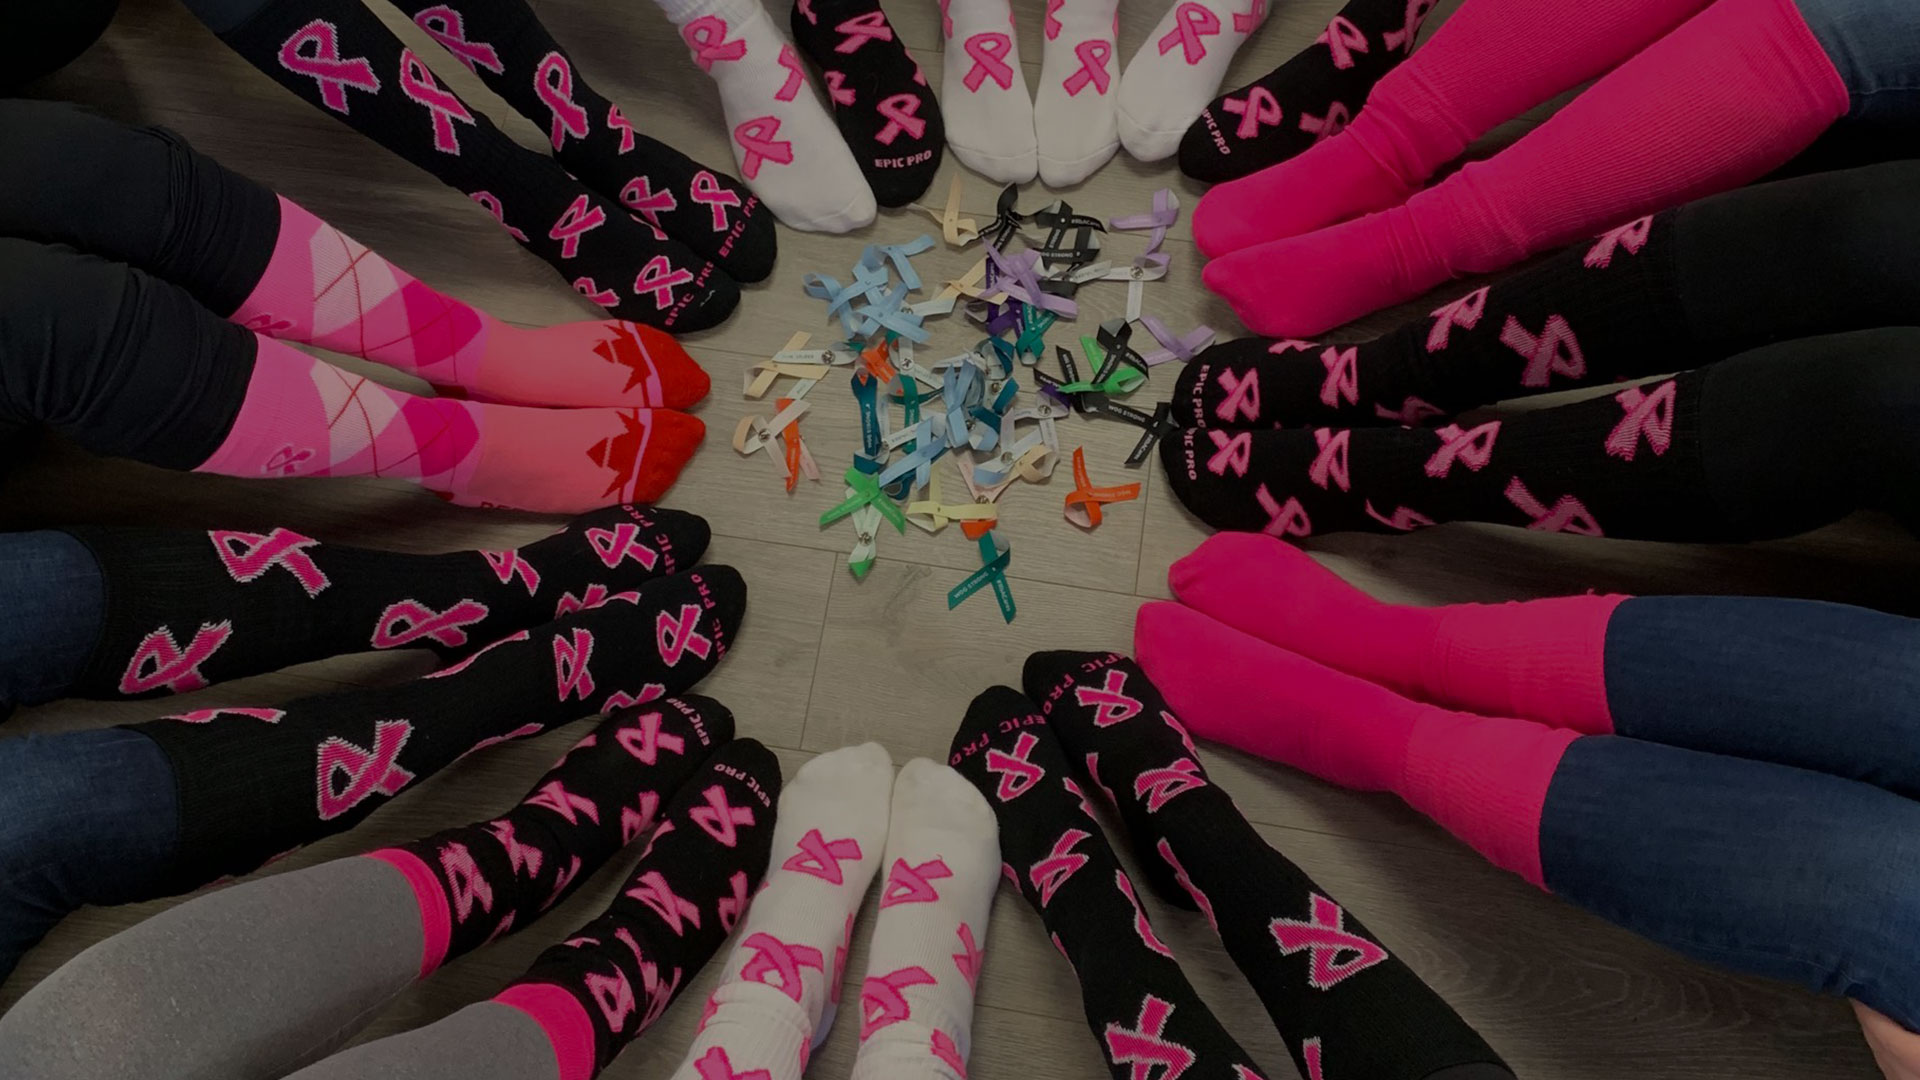 Esler Companies “Sock it to Cancer” Program Raises Money for The American Cancer Society